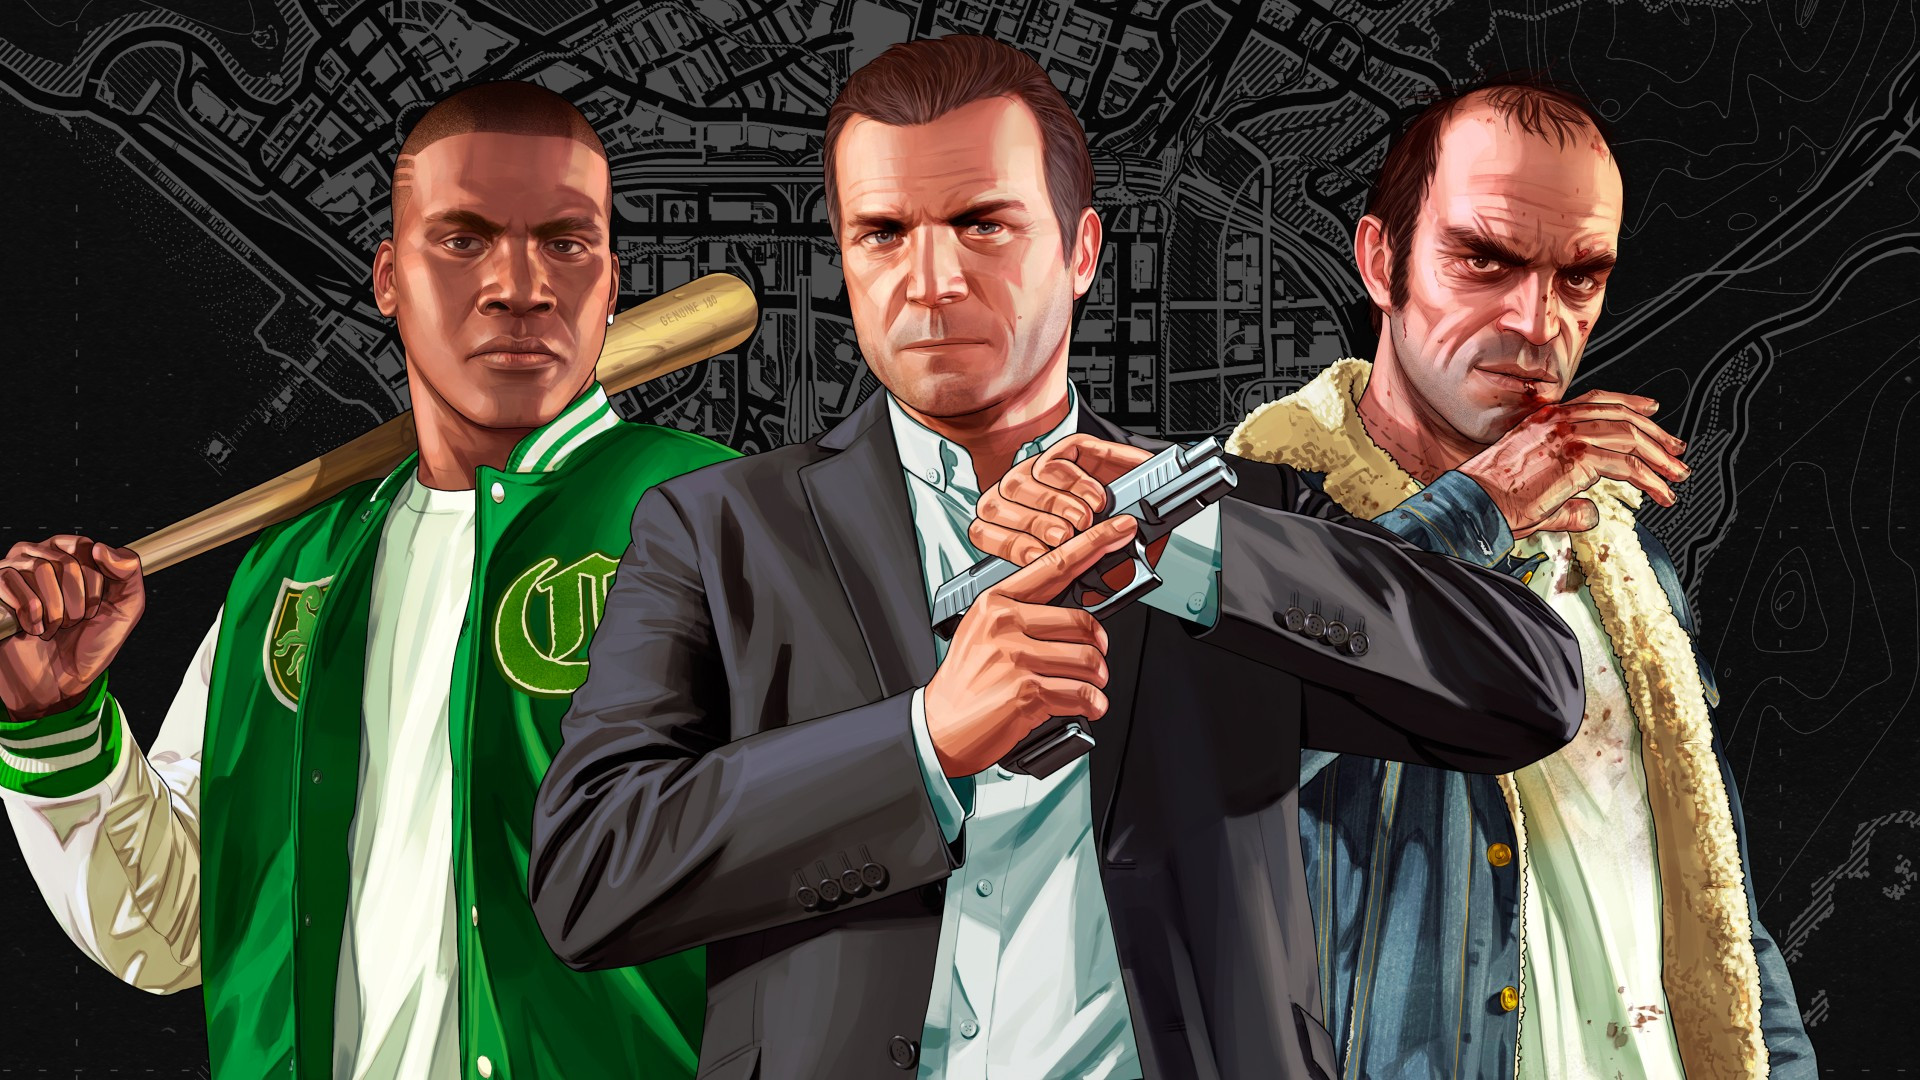 Grand Theft Auto 5 for PS5 and Xbox Series X/S is coming this November